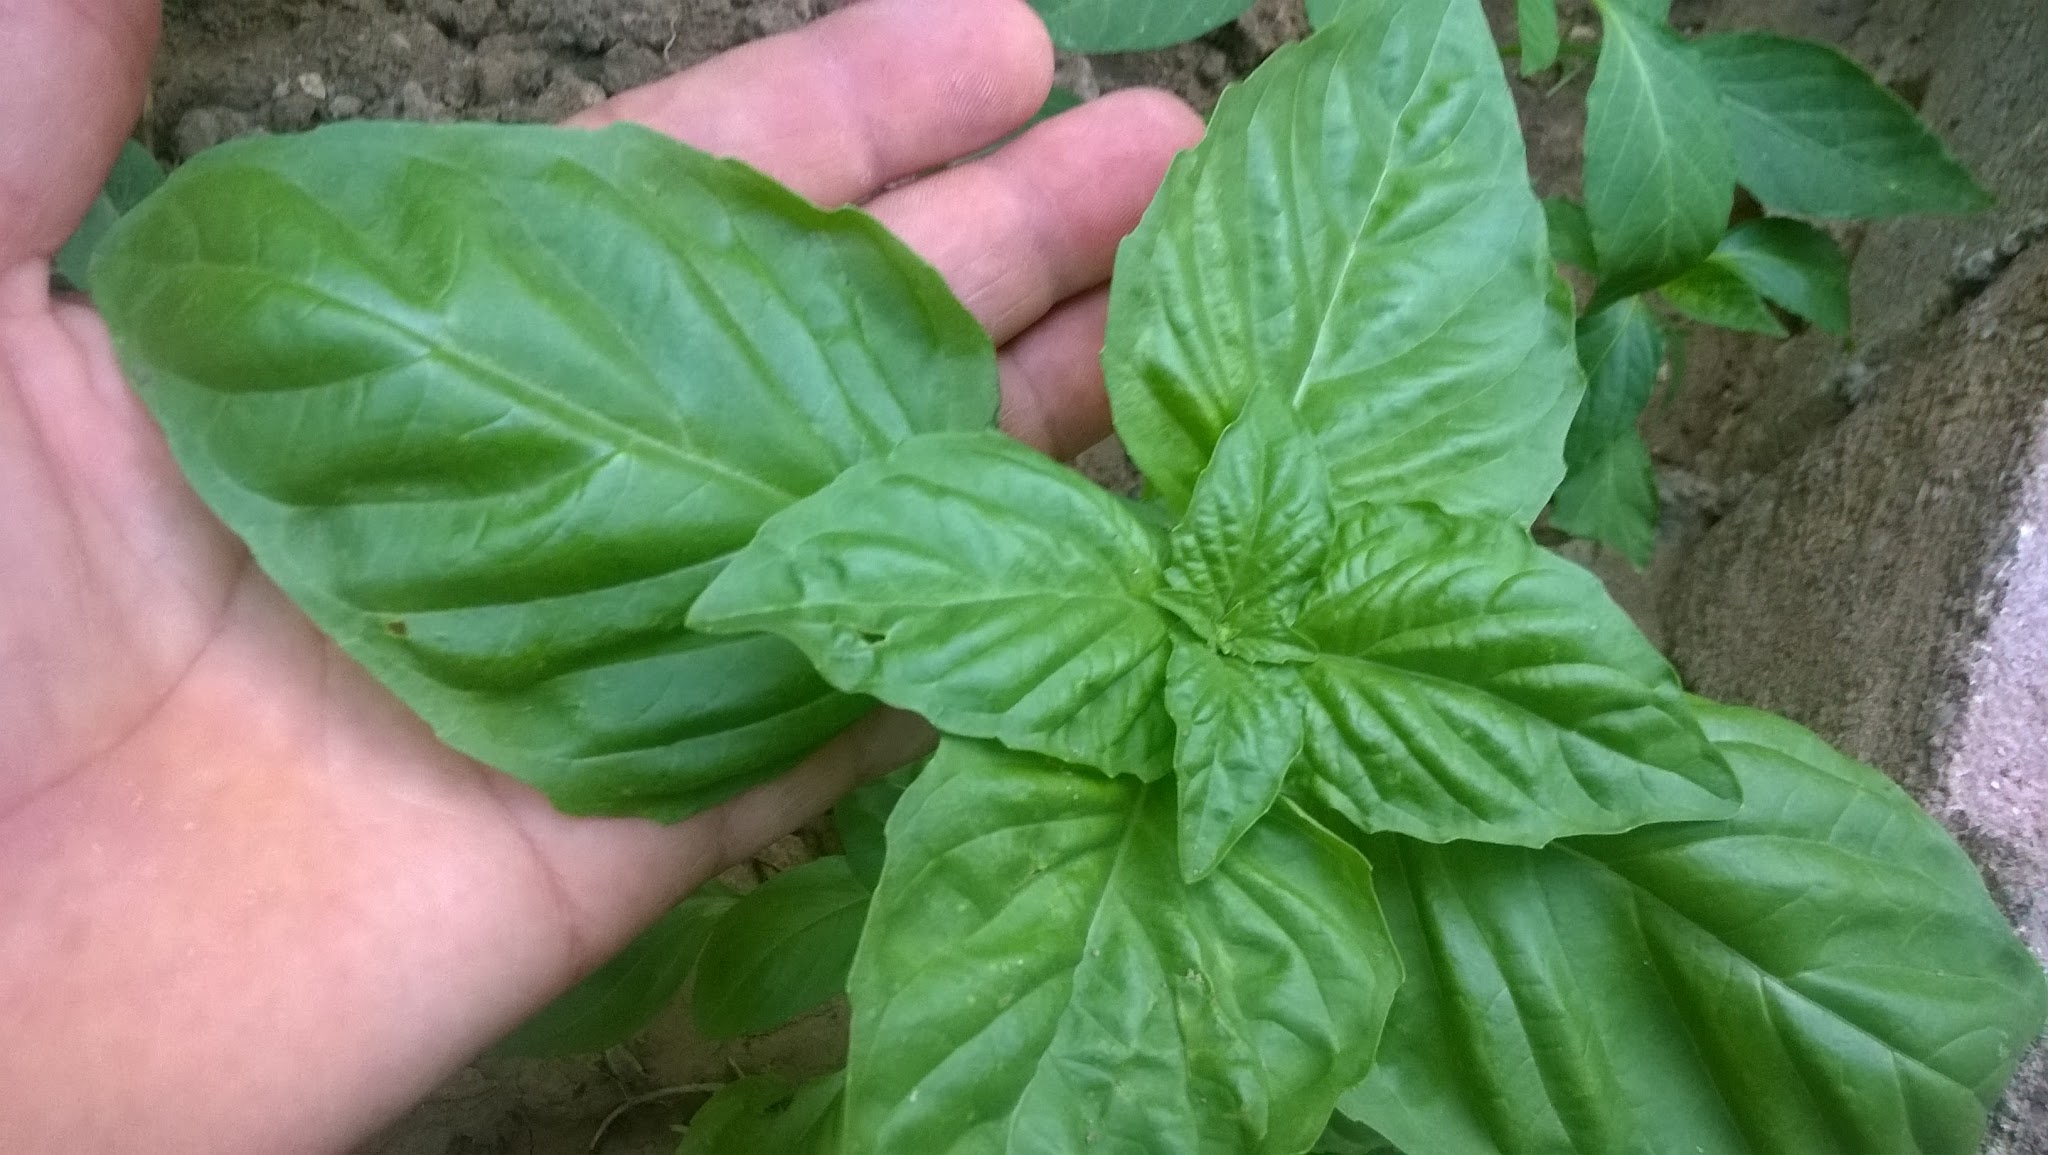 Basil is a tender annual, aromatic plant with a spicy odor and flavor.